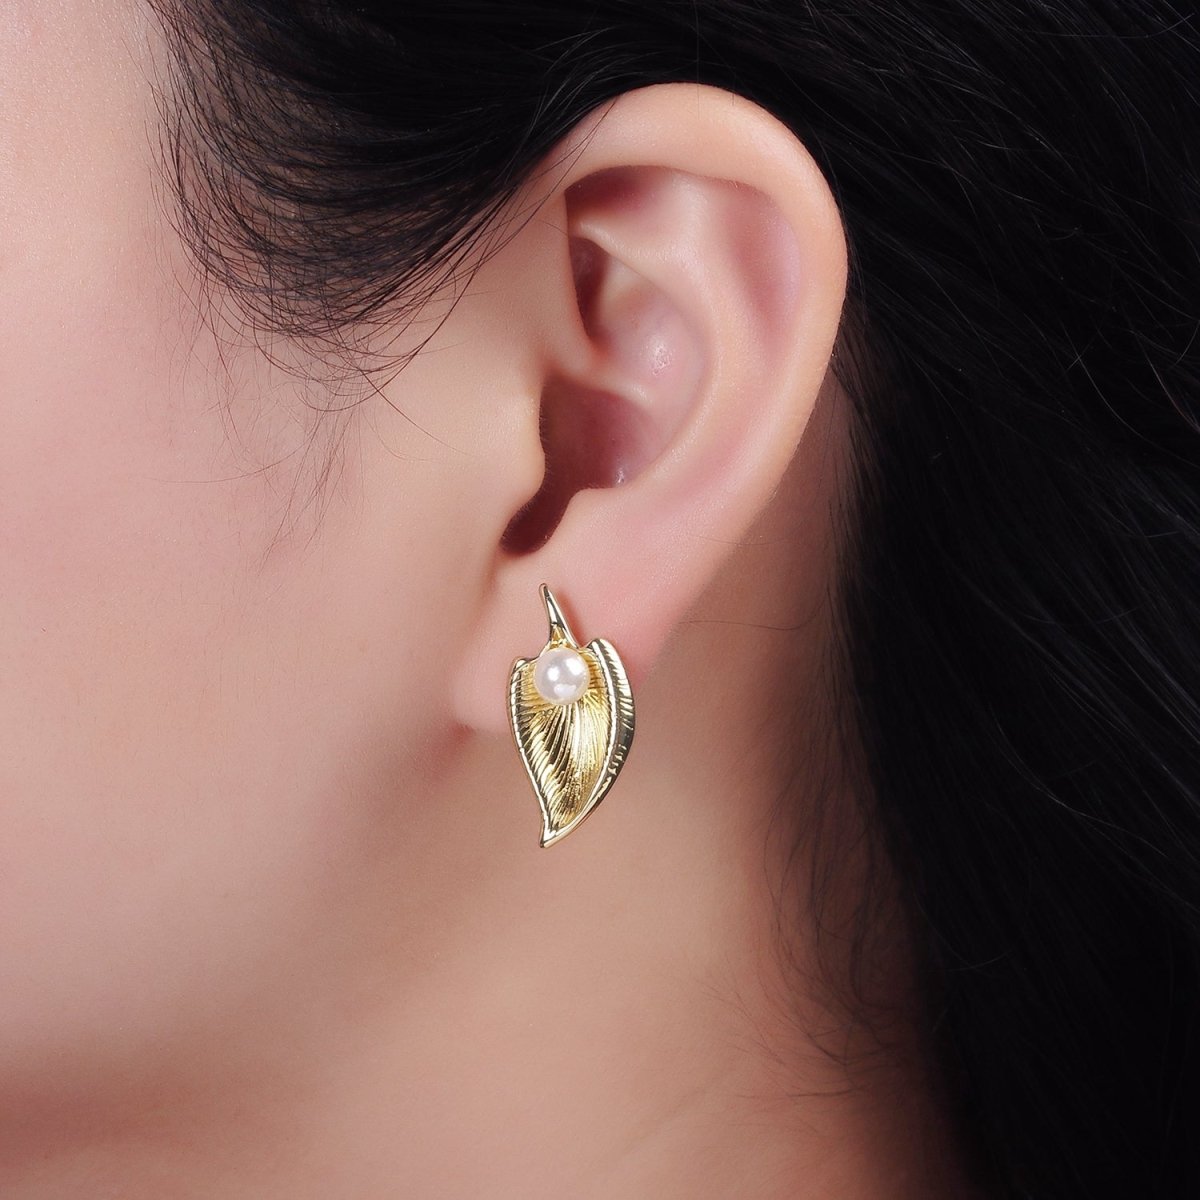 14K Gold Filled Pearl Curved Line-Textured Teardrop Dome Stud Earrings Set | AE955 - DLUXCA